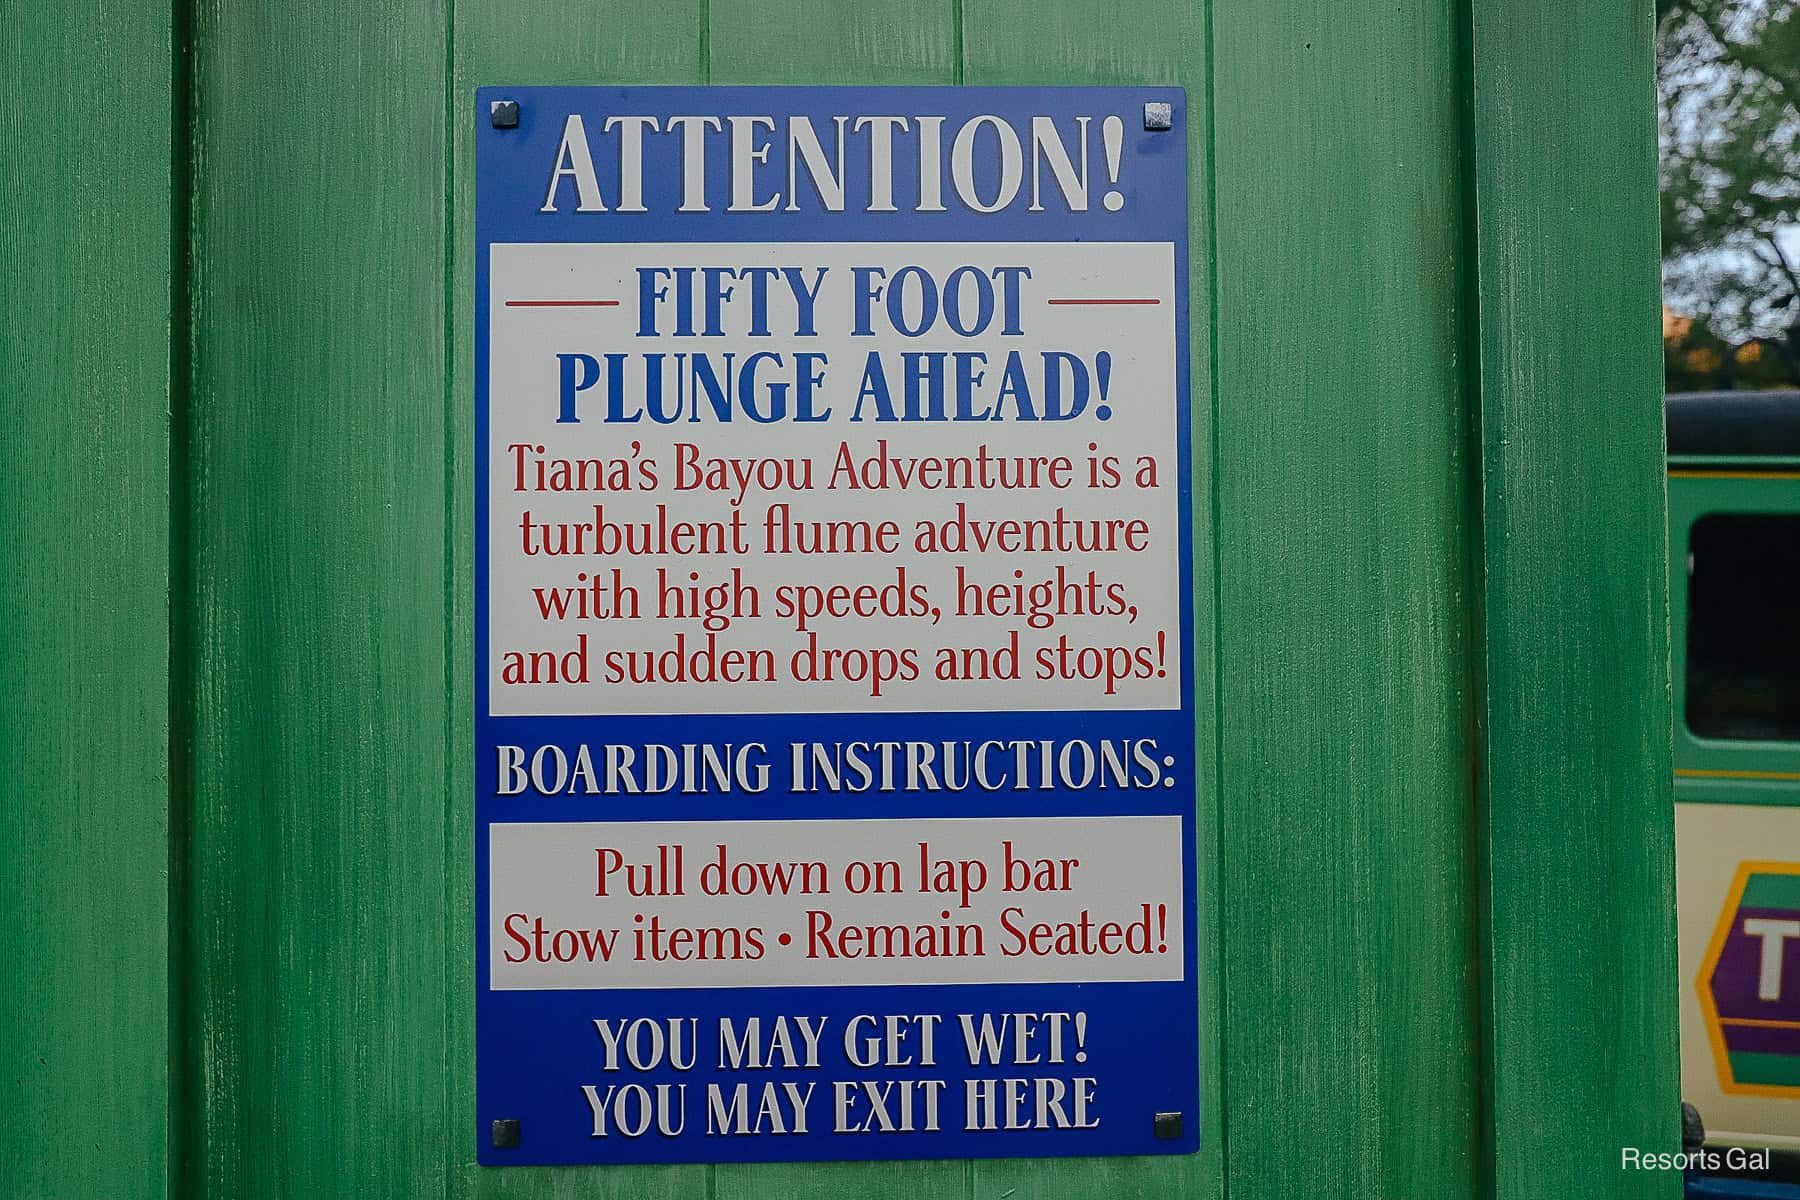 ride signs warning guests that Tiana's Bayou Adventure is a turbulent flume adventure with high speeds, heights, and sudden drops and stops. 